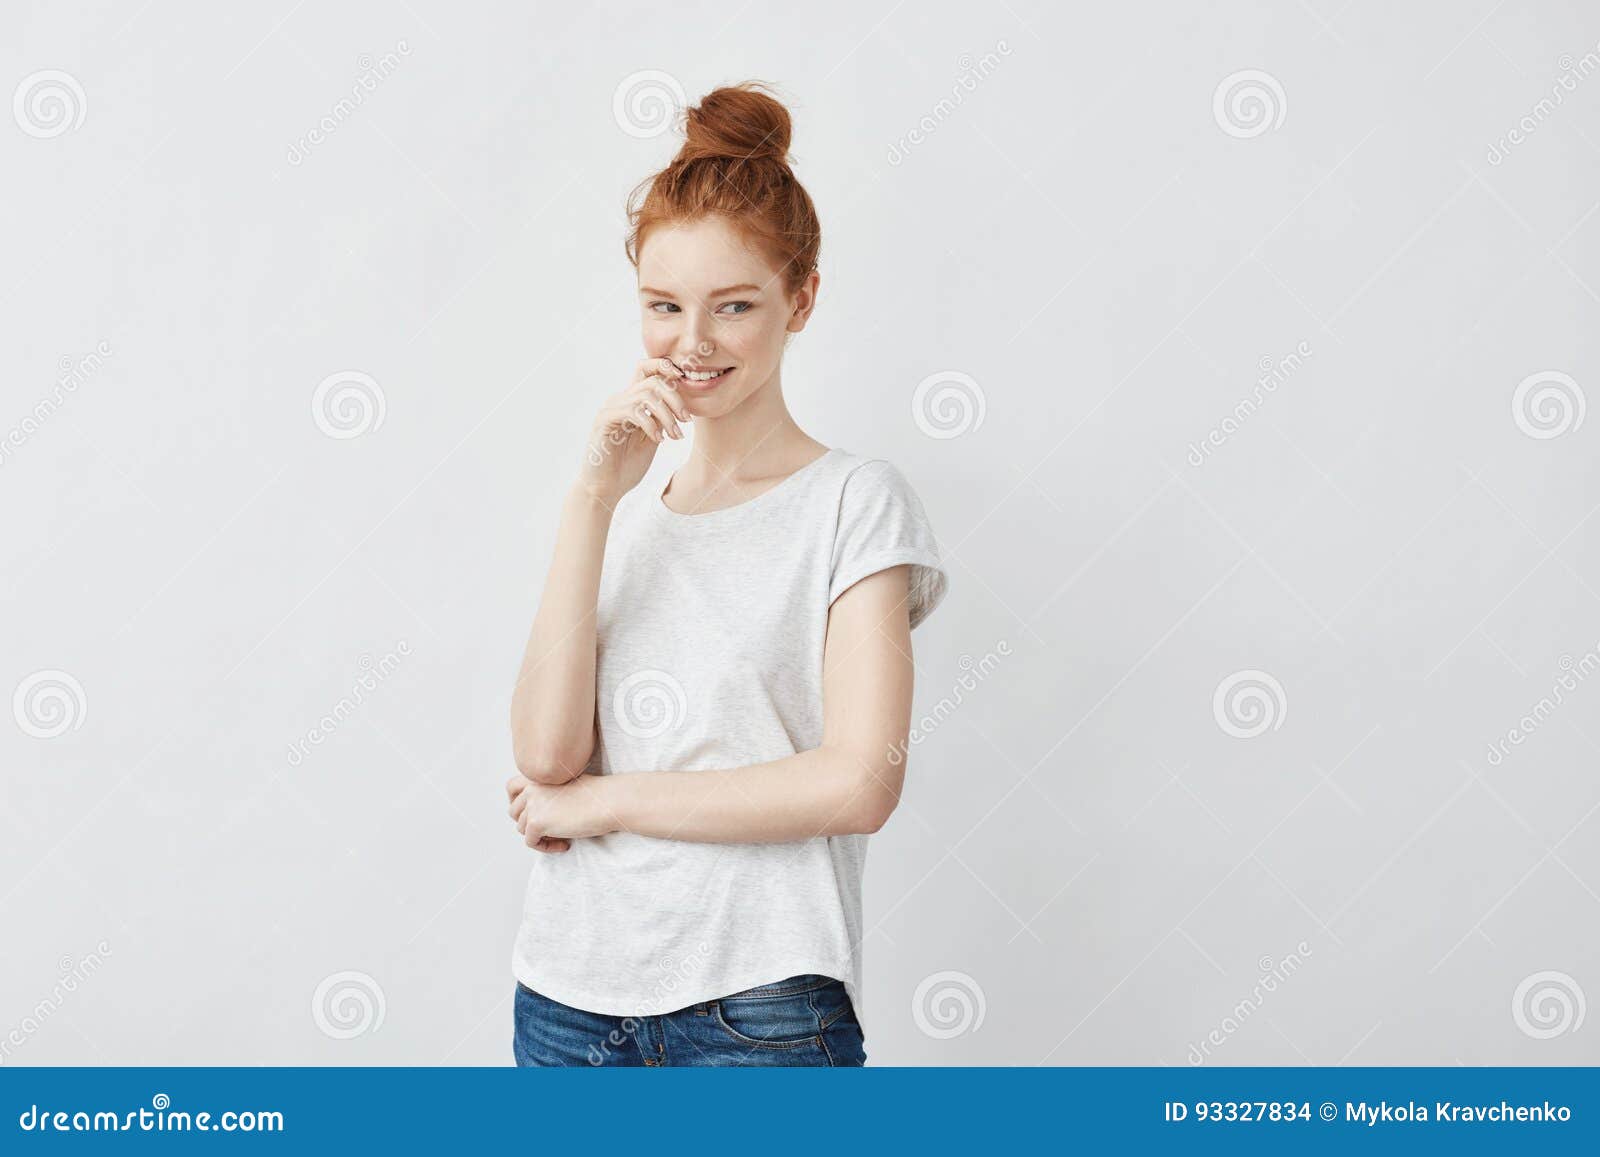 Young Attractive Playful Girl with Foxy Hair Smiling. Stock Photo ...